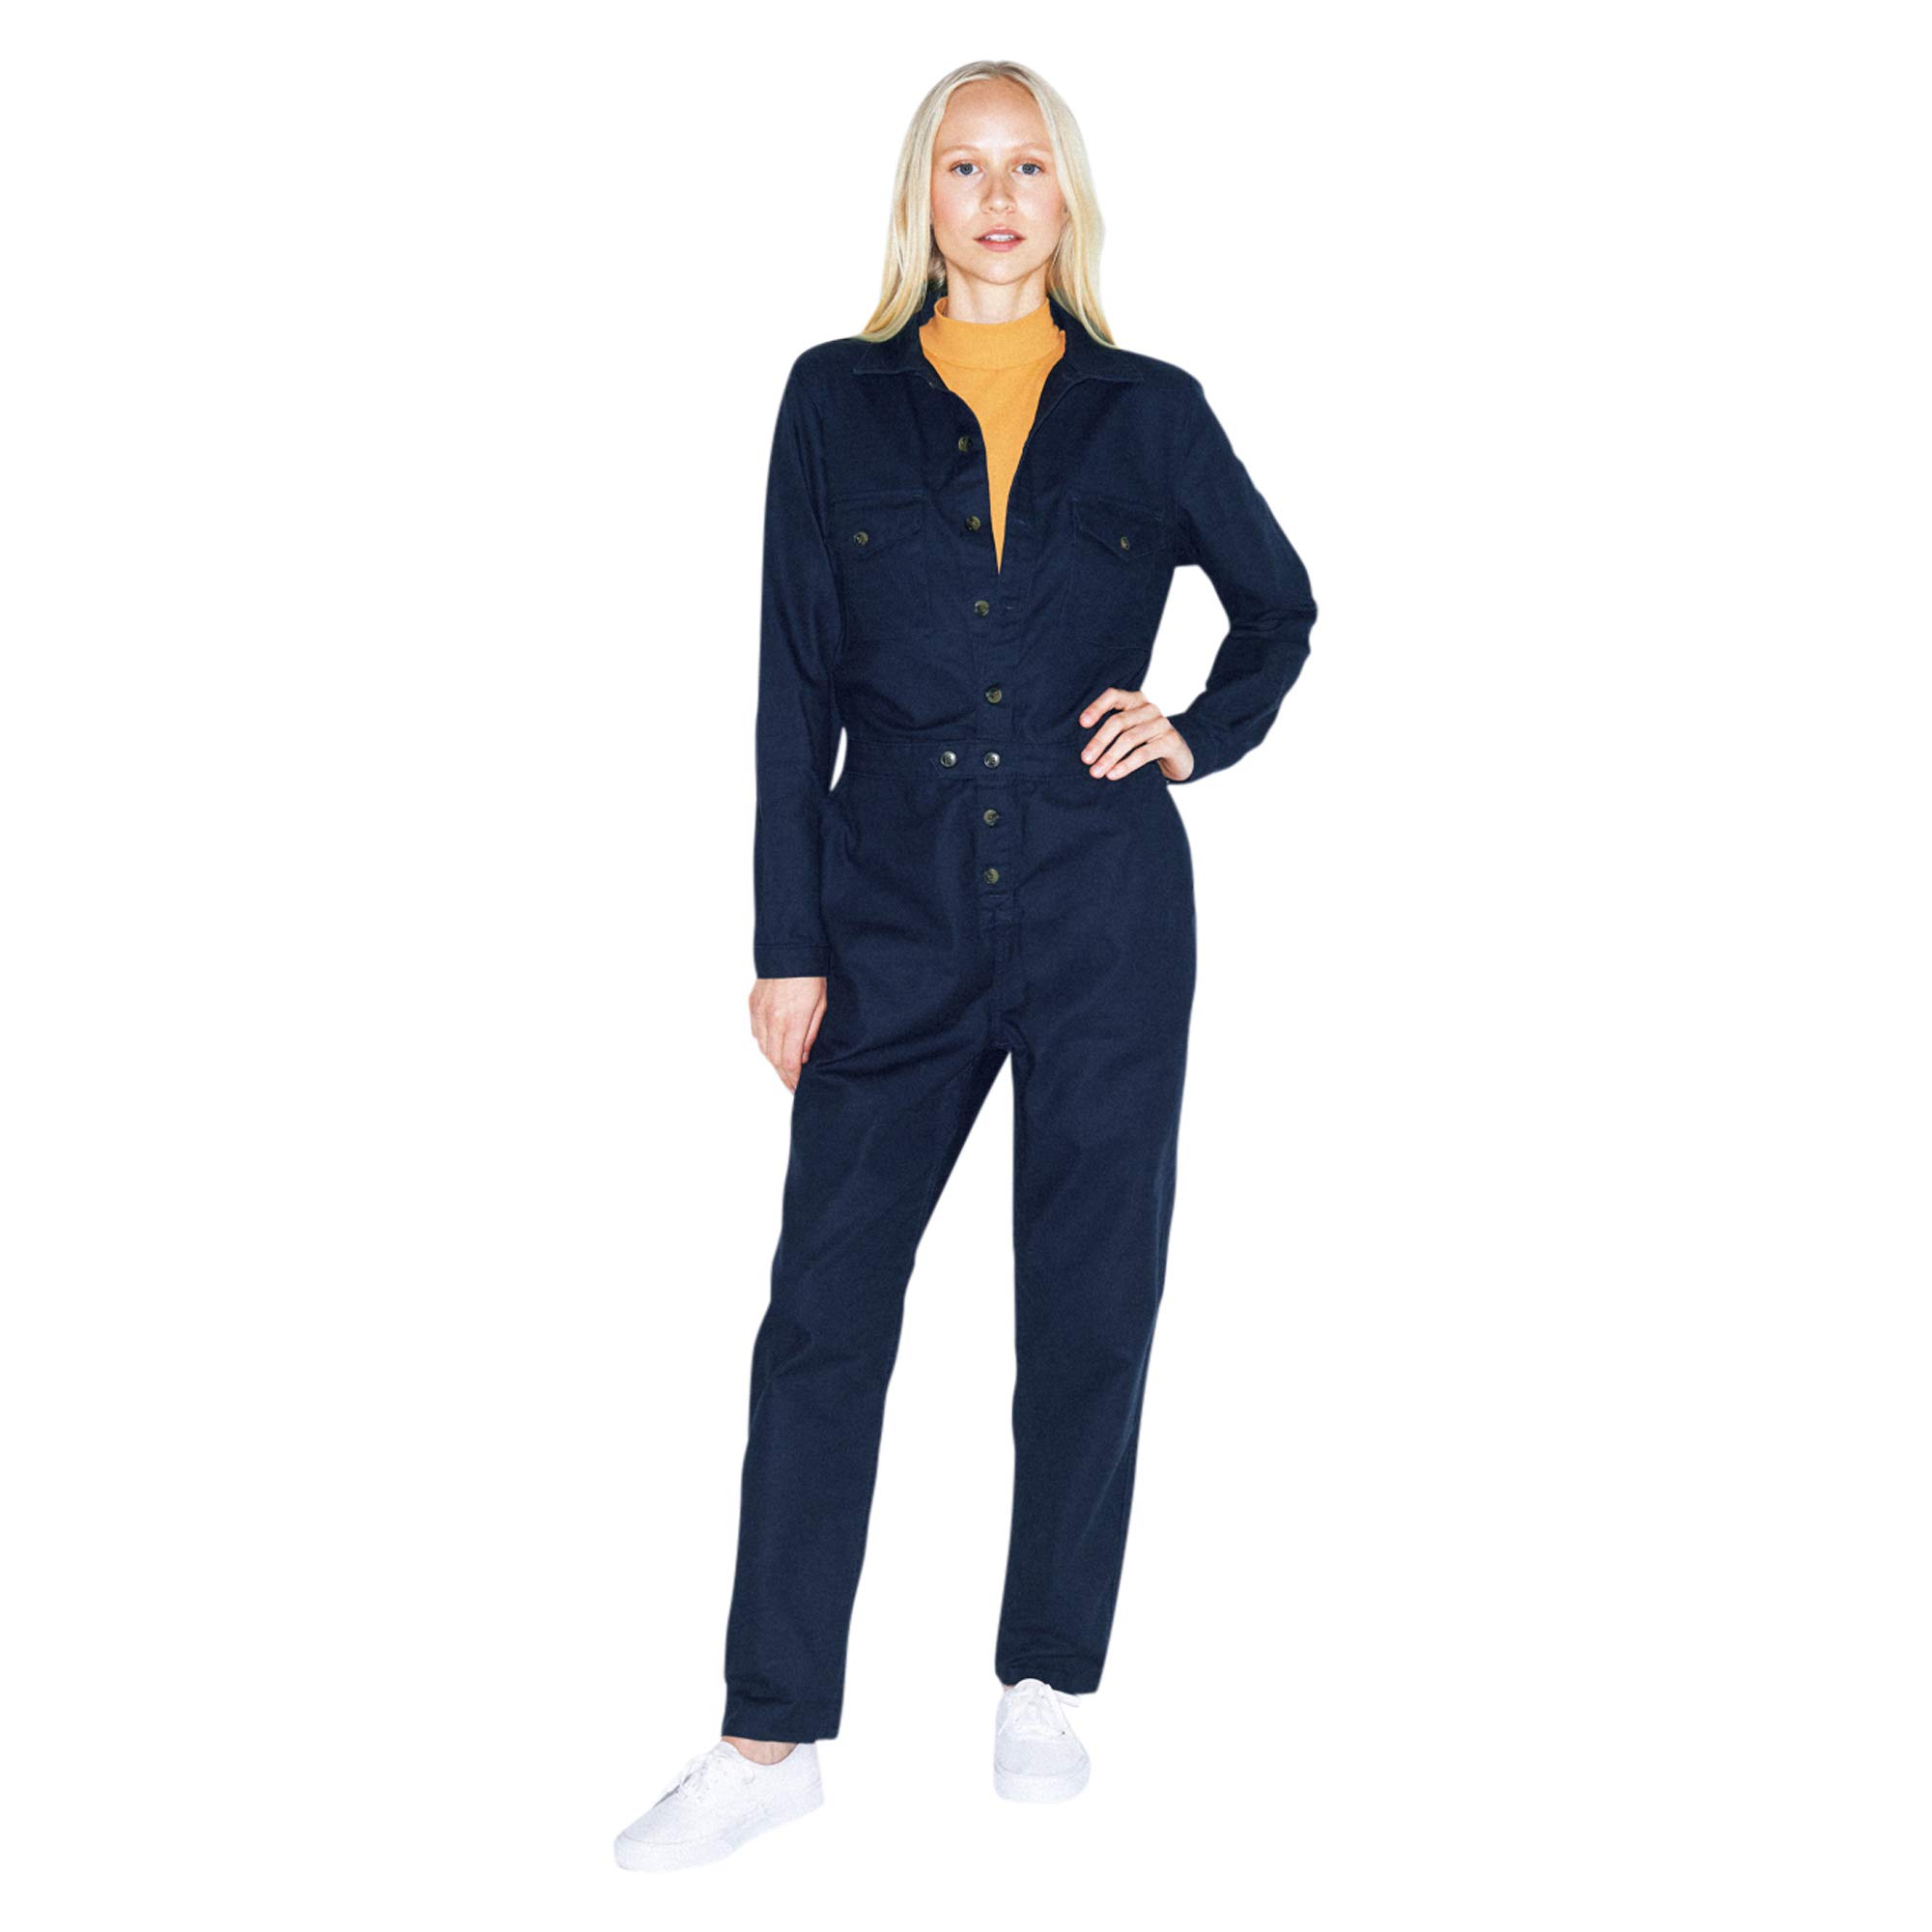 American Apparel Women's Long Sleeve Twill Coverall